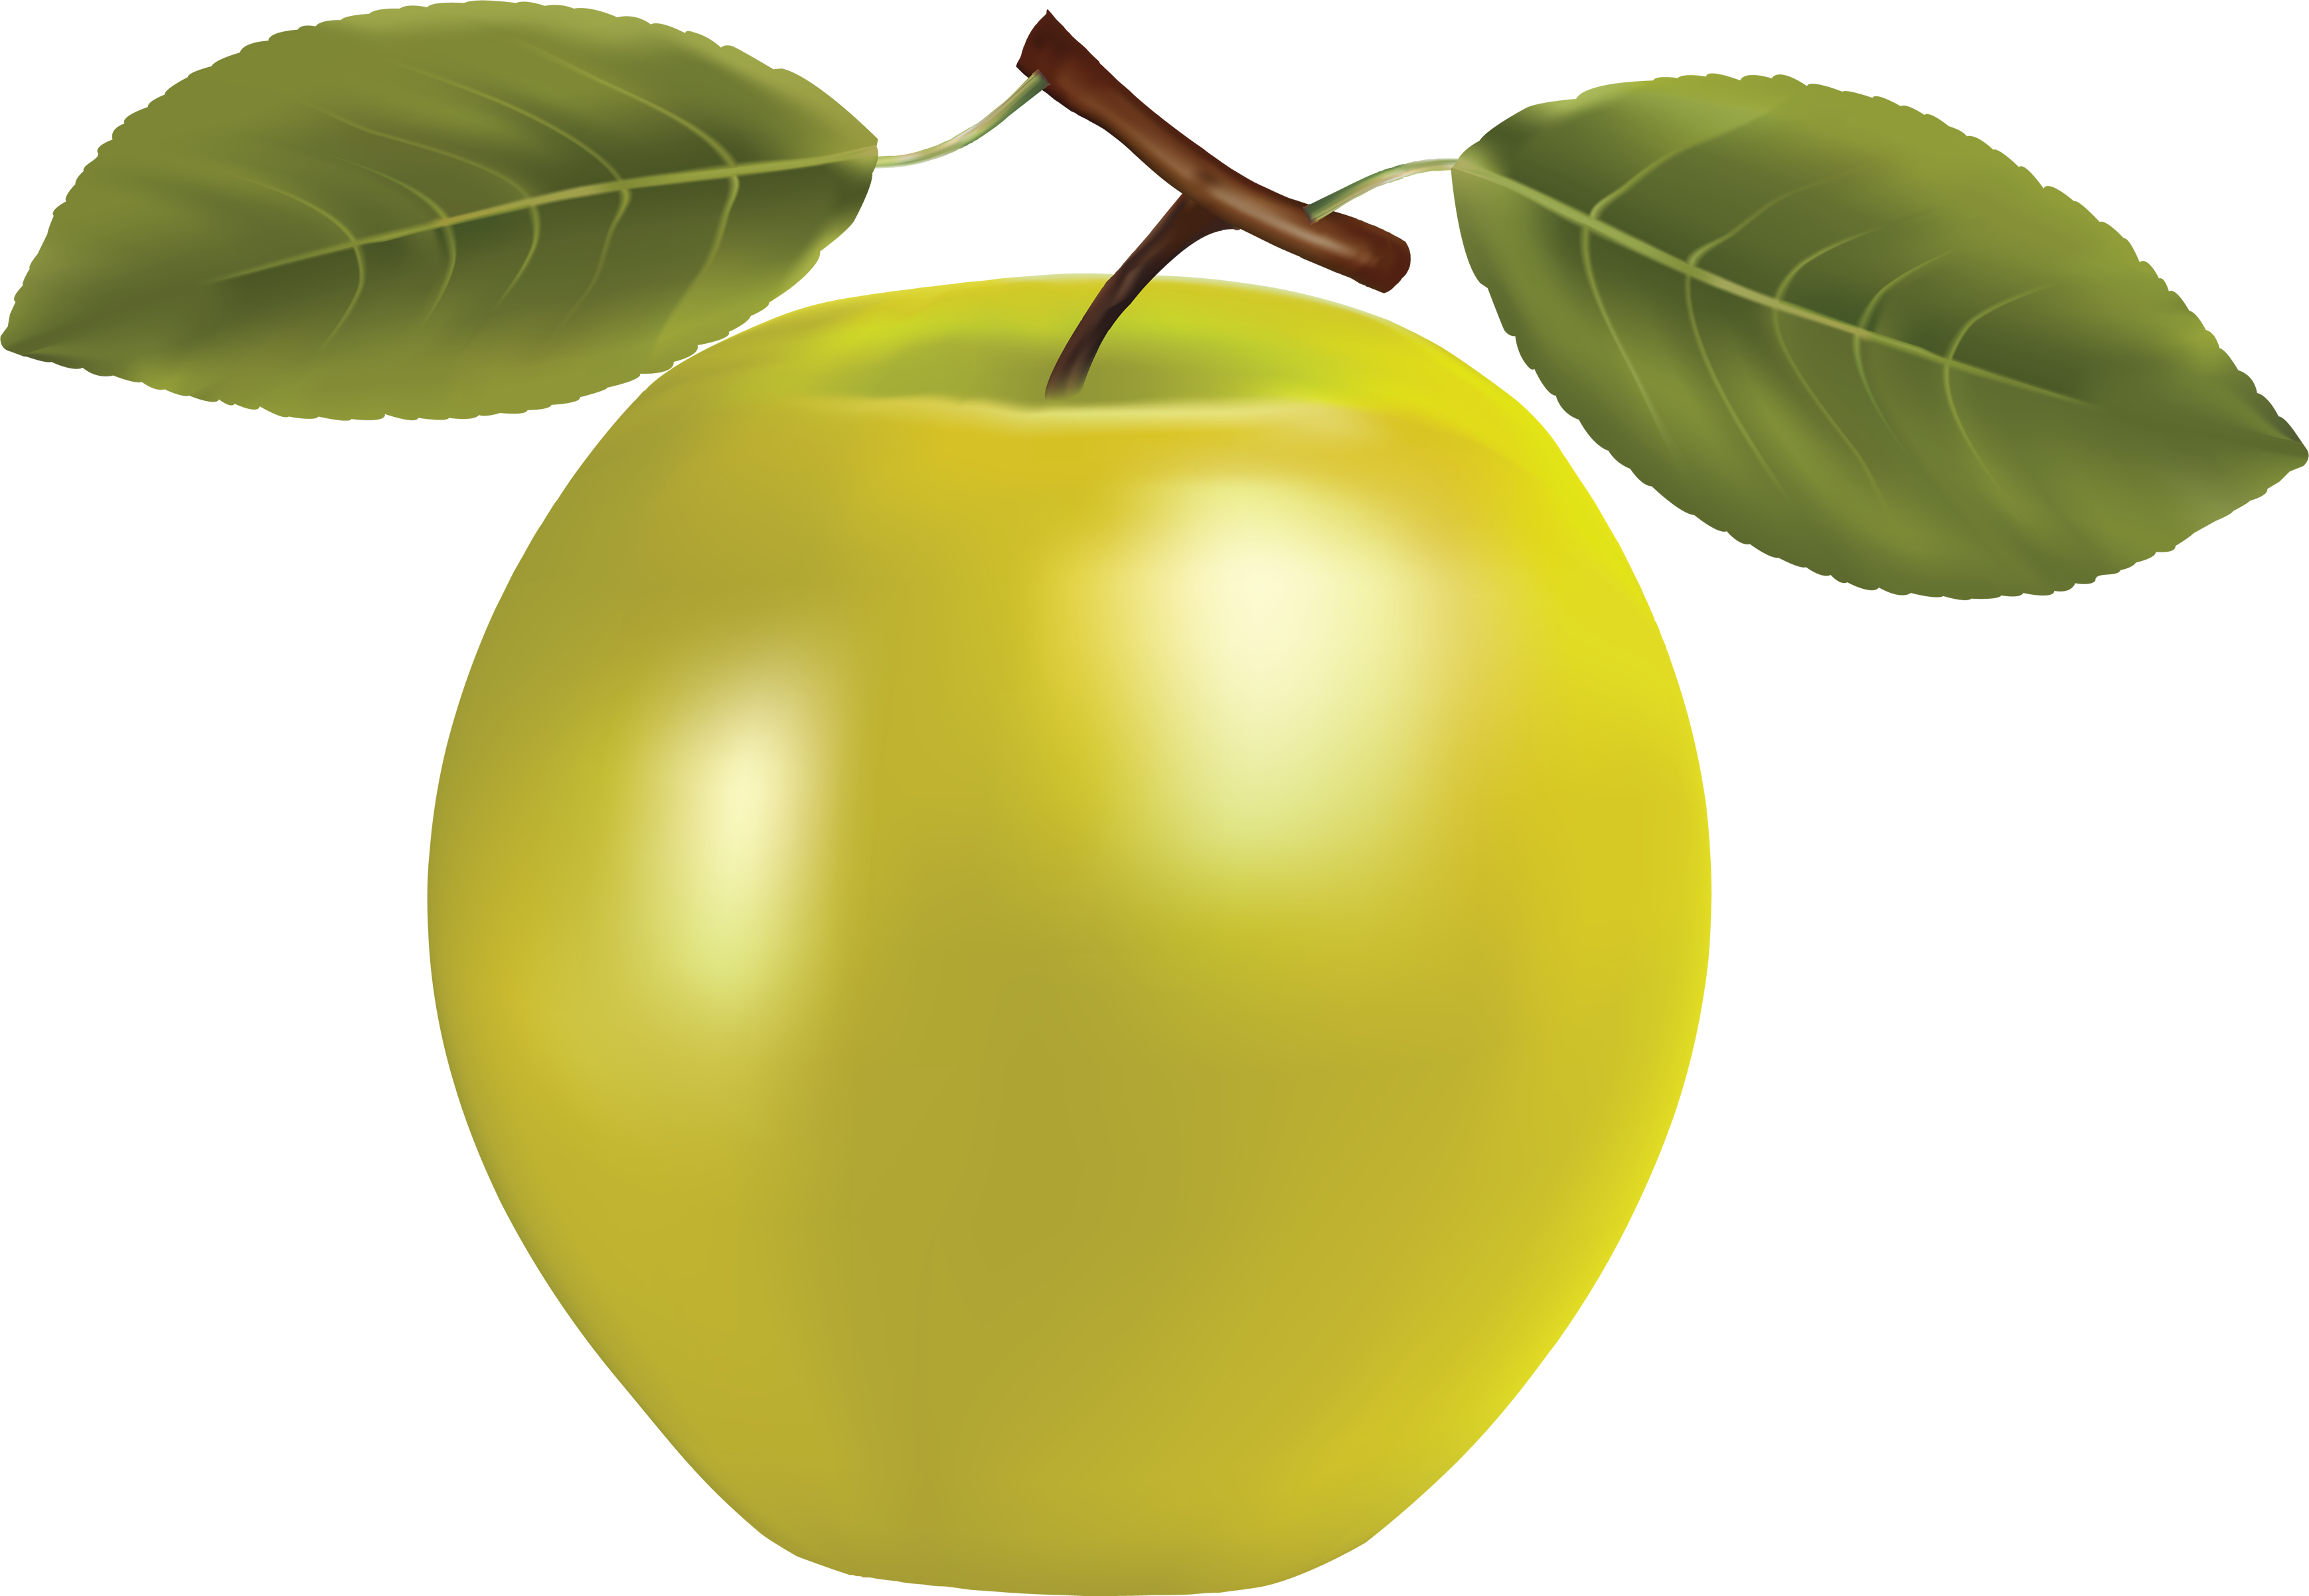 Download PNG image: Yellow PNG apple image, free apple PNG picture ...